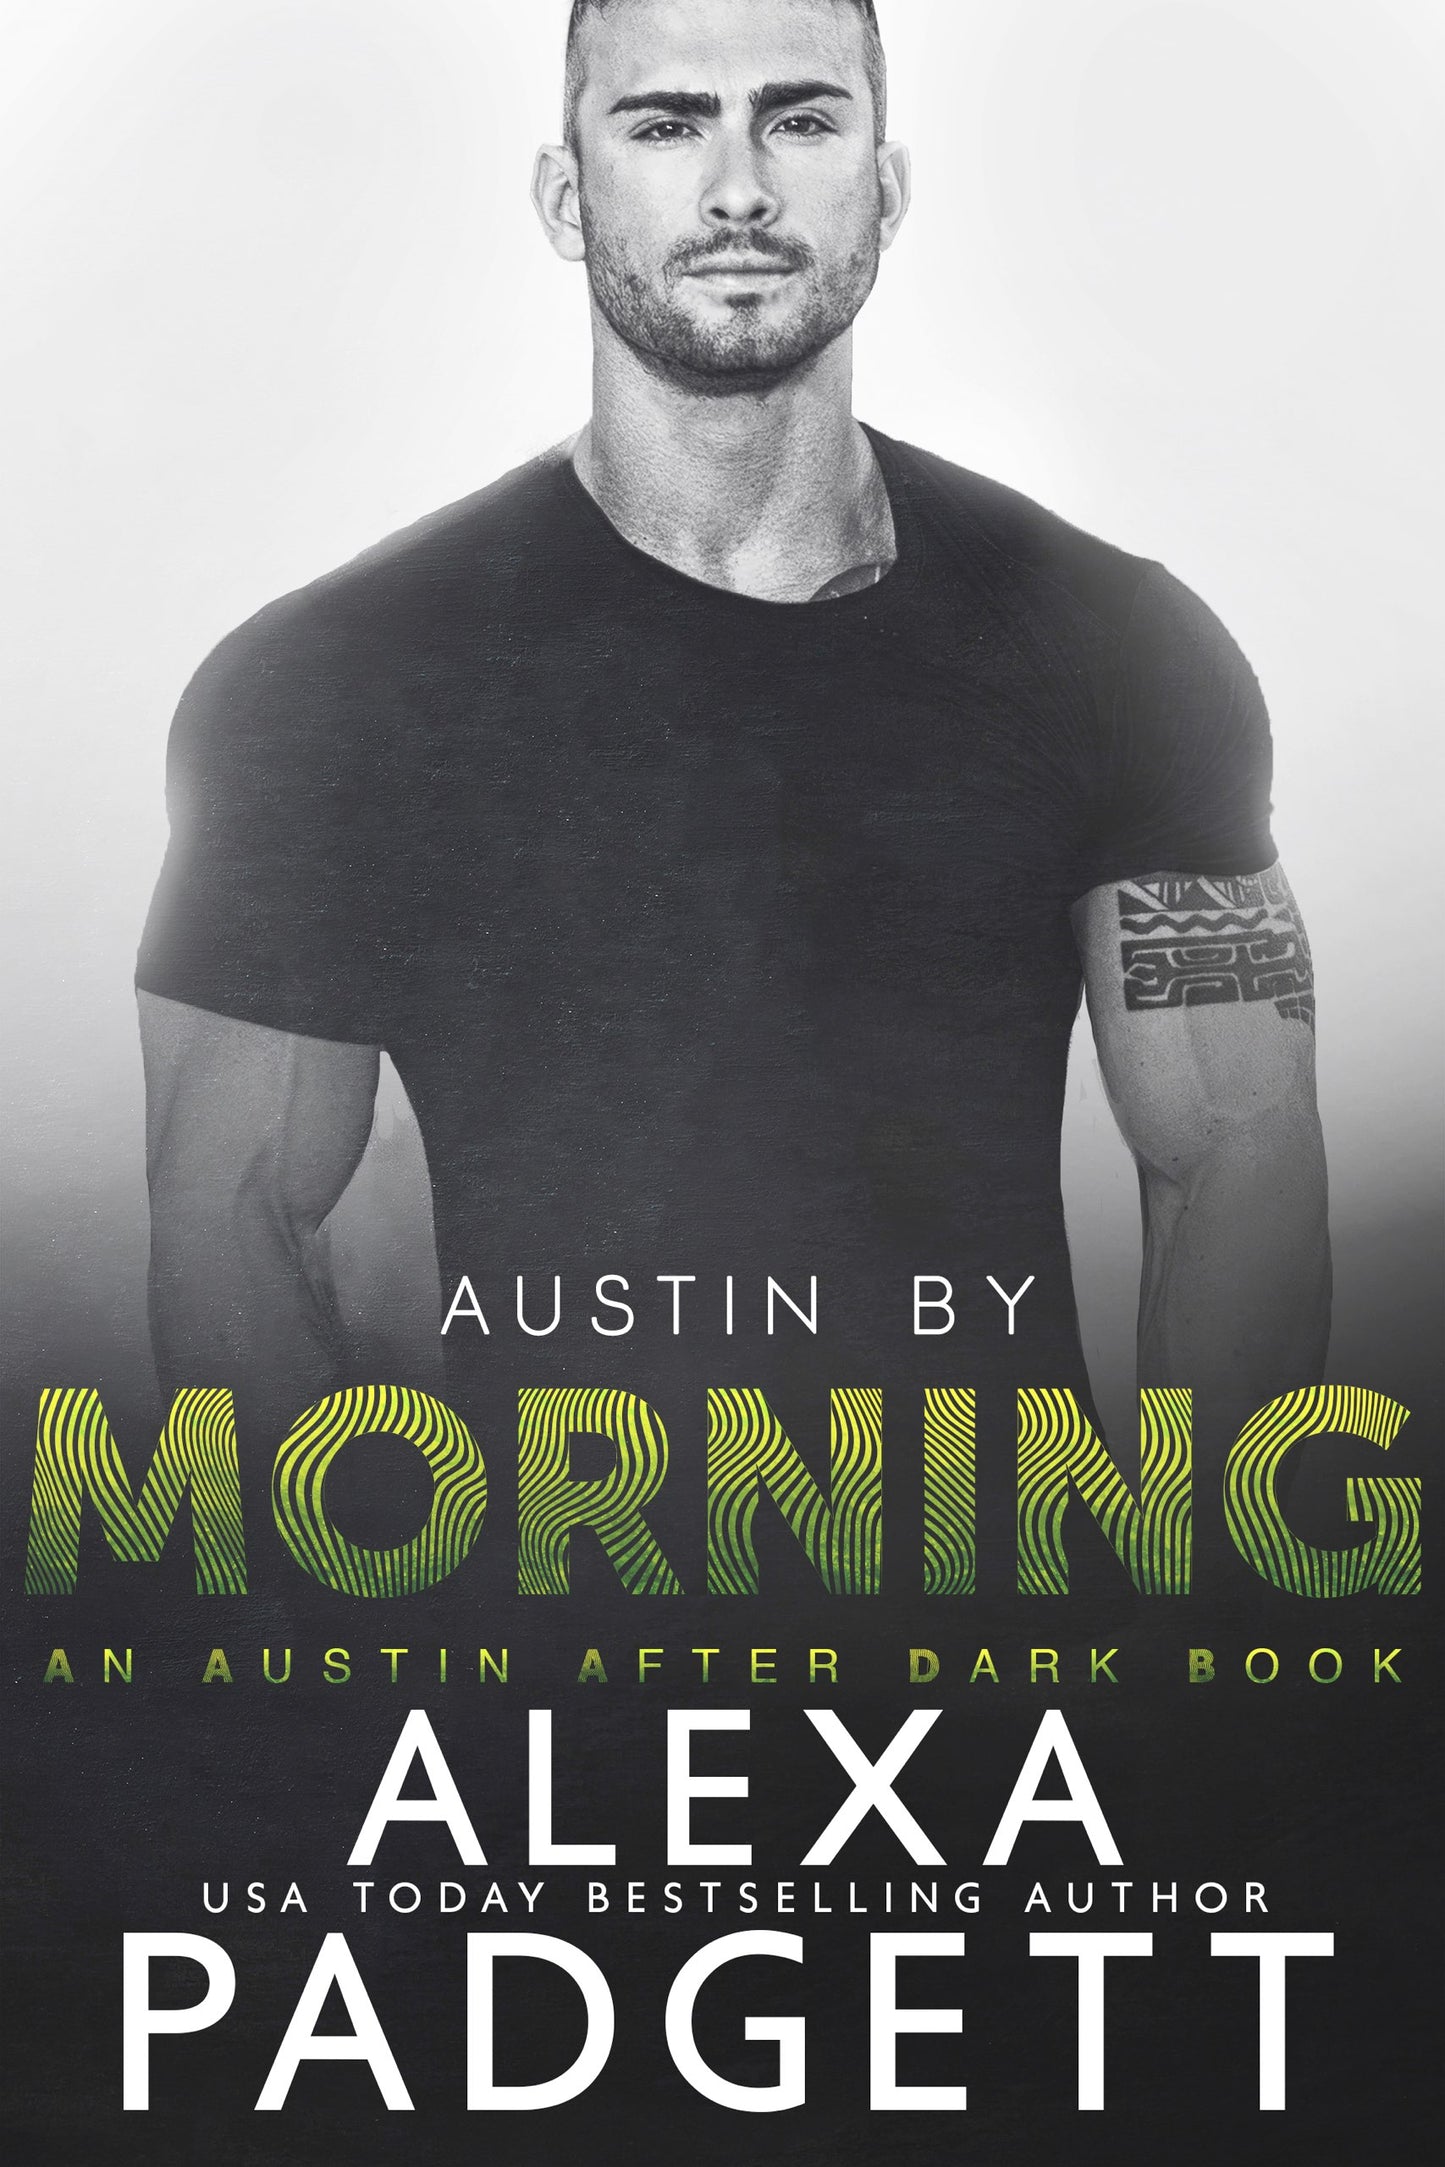 Autographed Copy of Austin By Morning